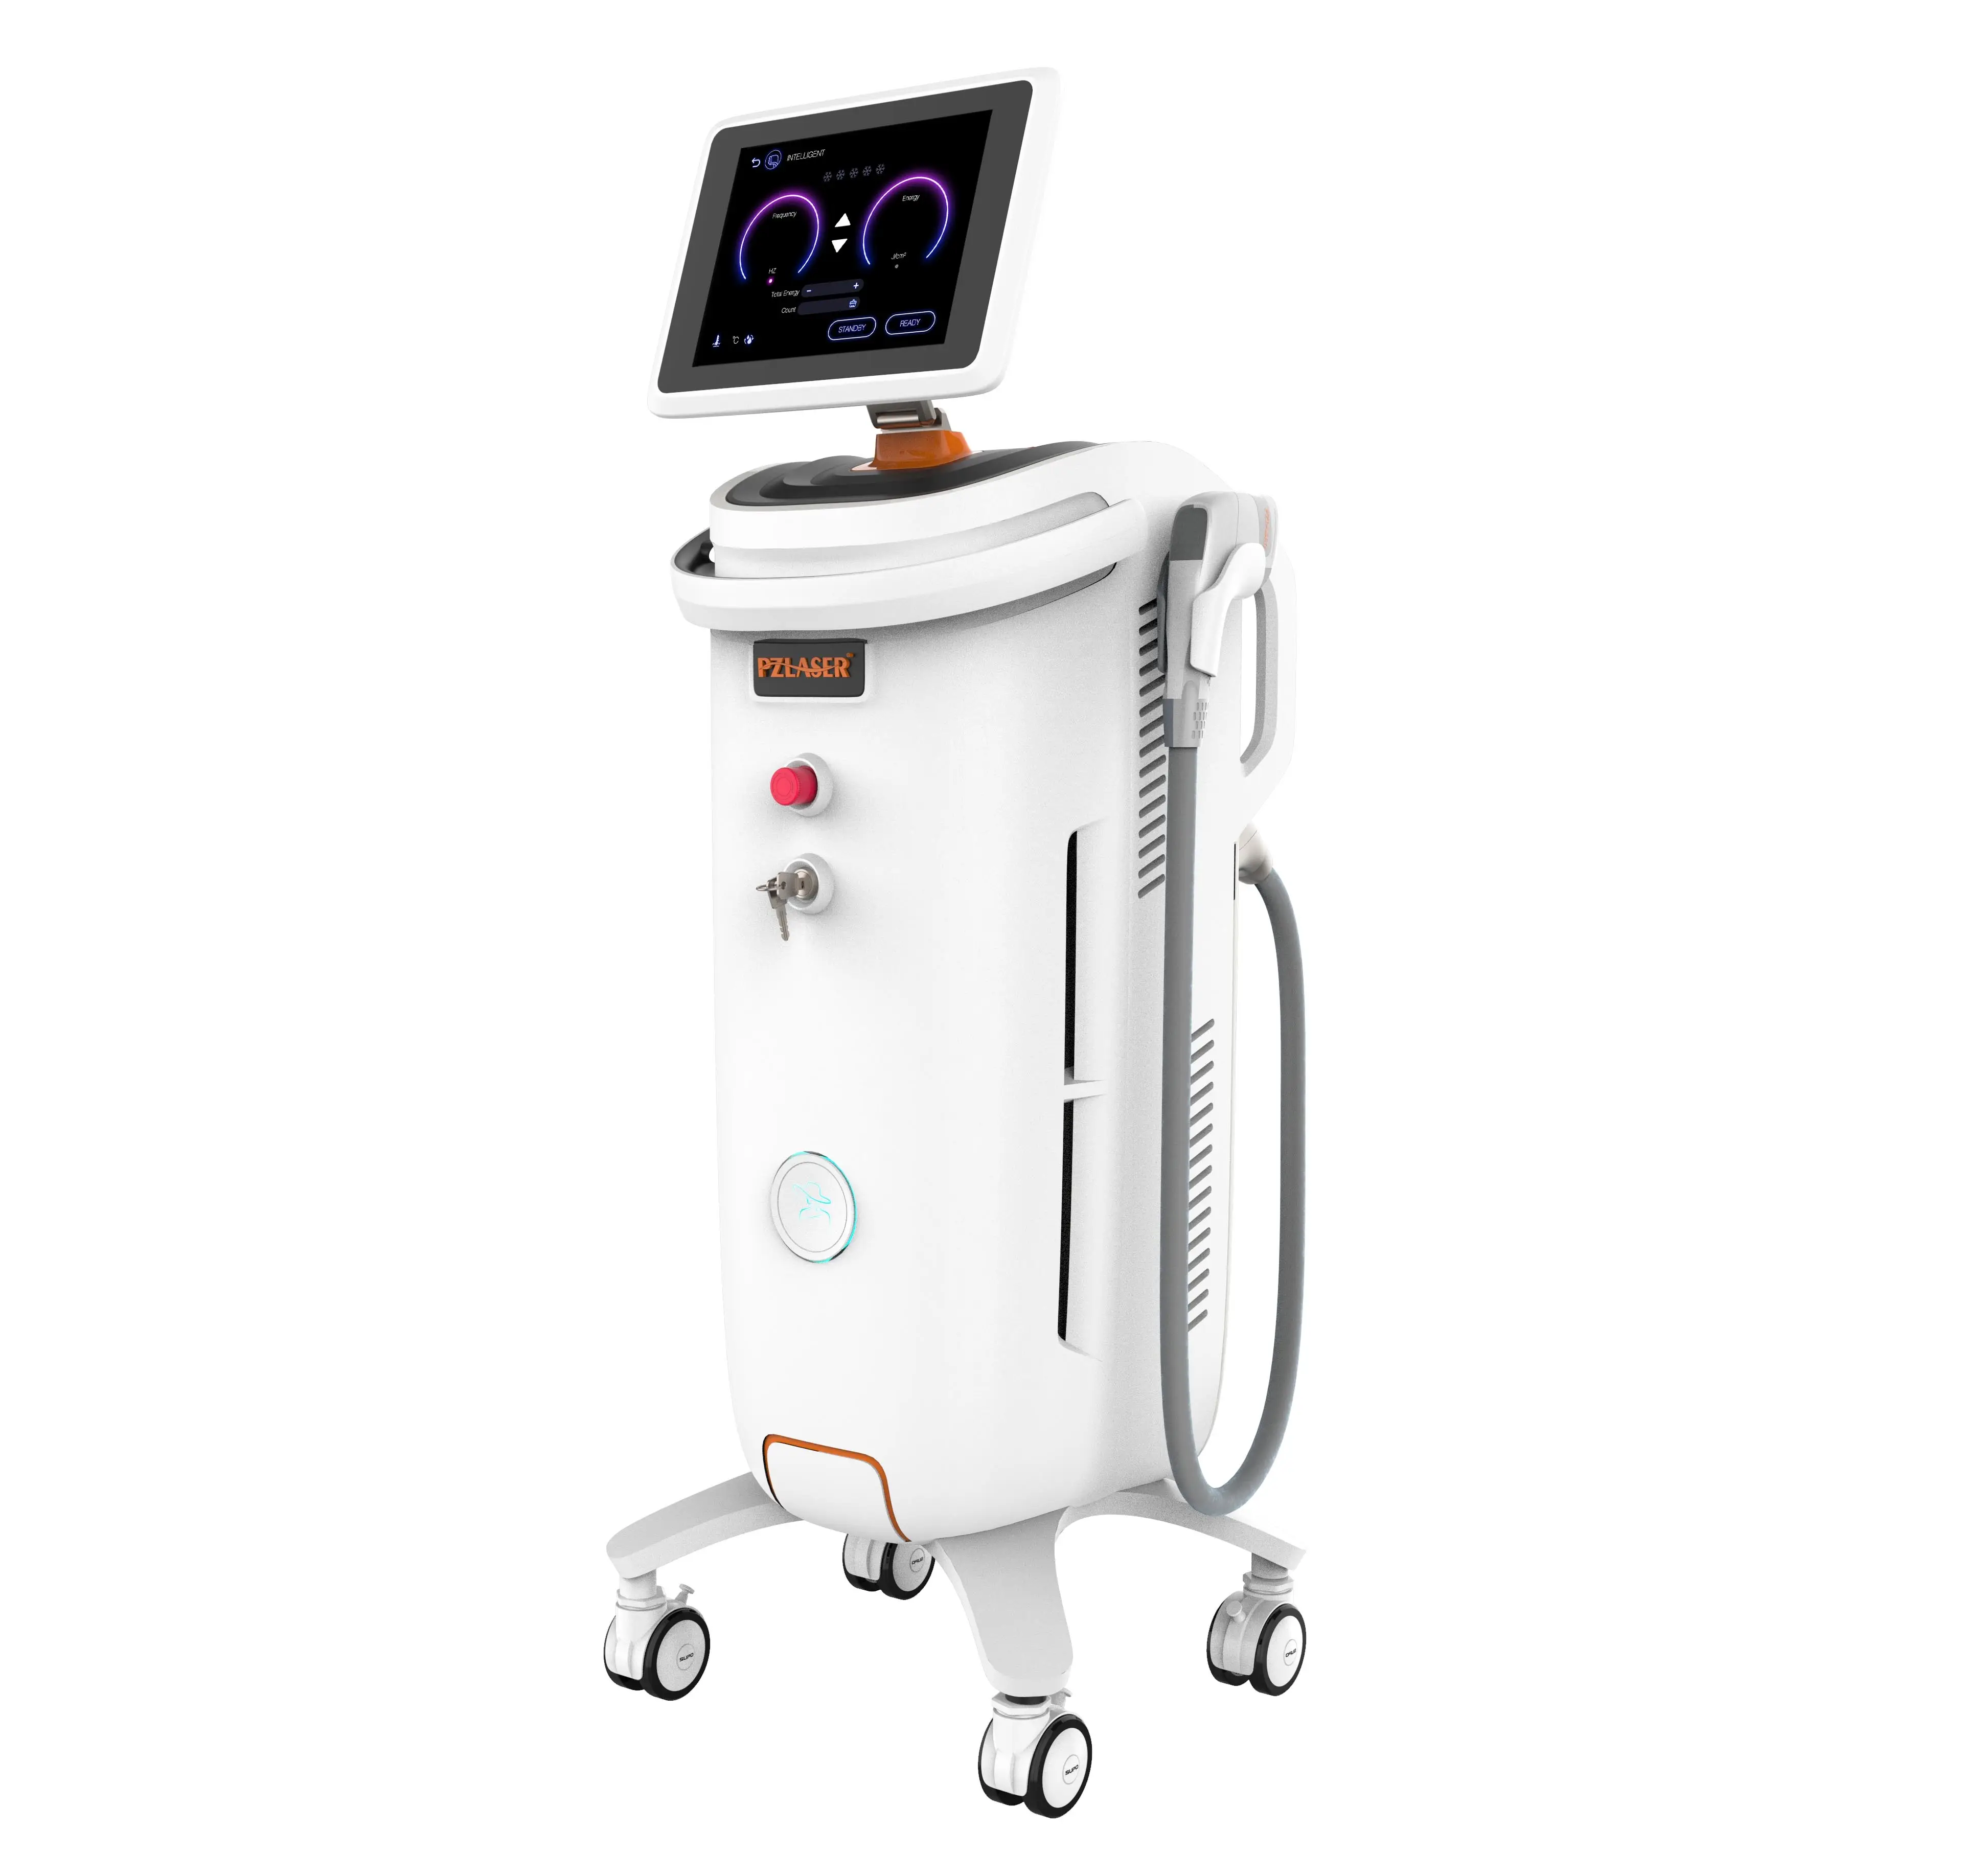 Eos Ice Permanent 808 Diode Laser Hair Removal Machine Price Triple Wavelength Diode Laser 755 1064 808nm